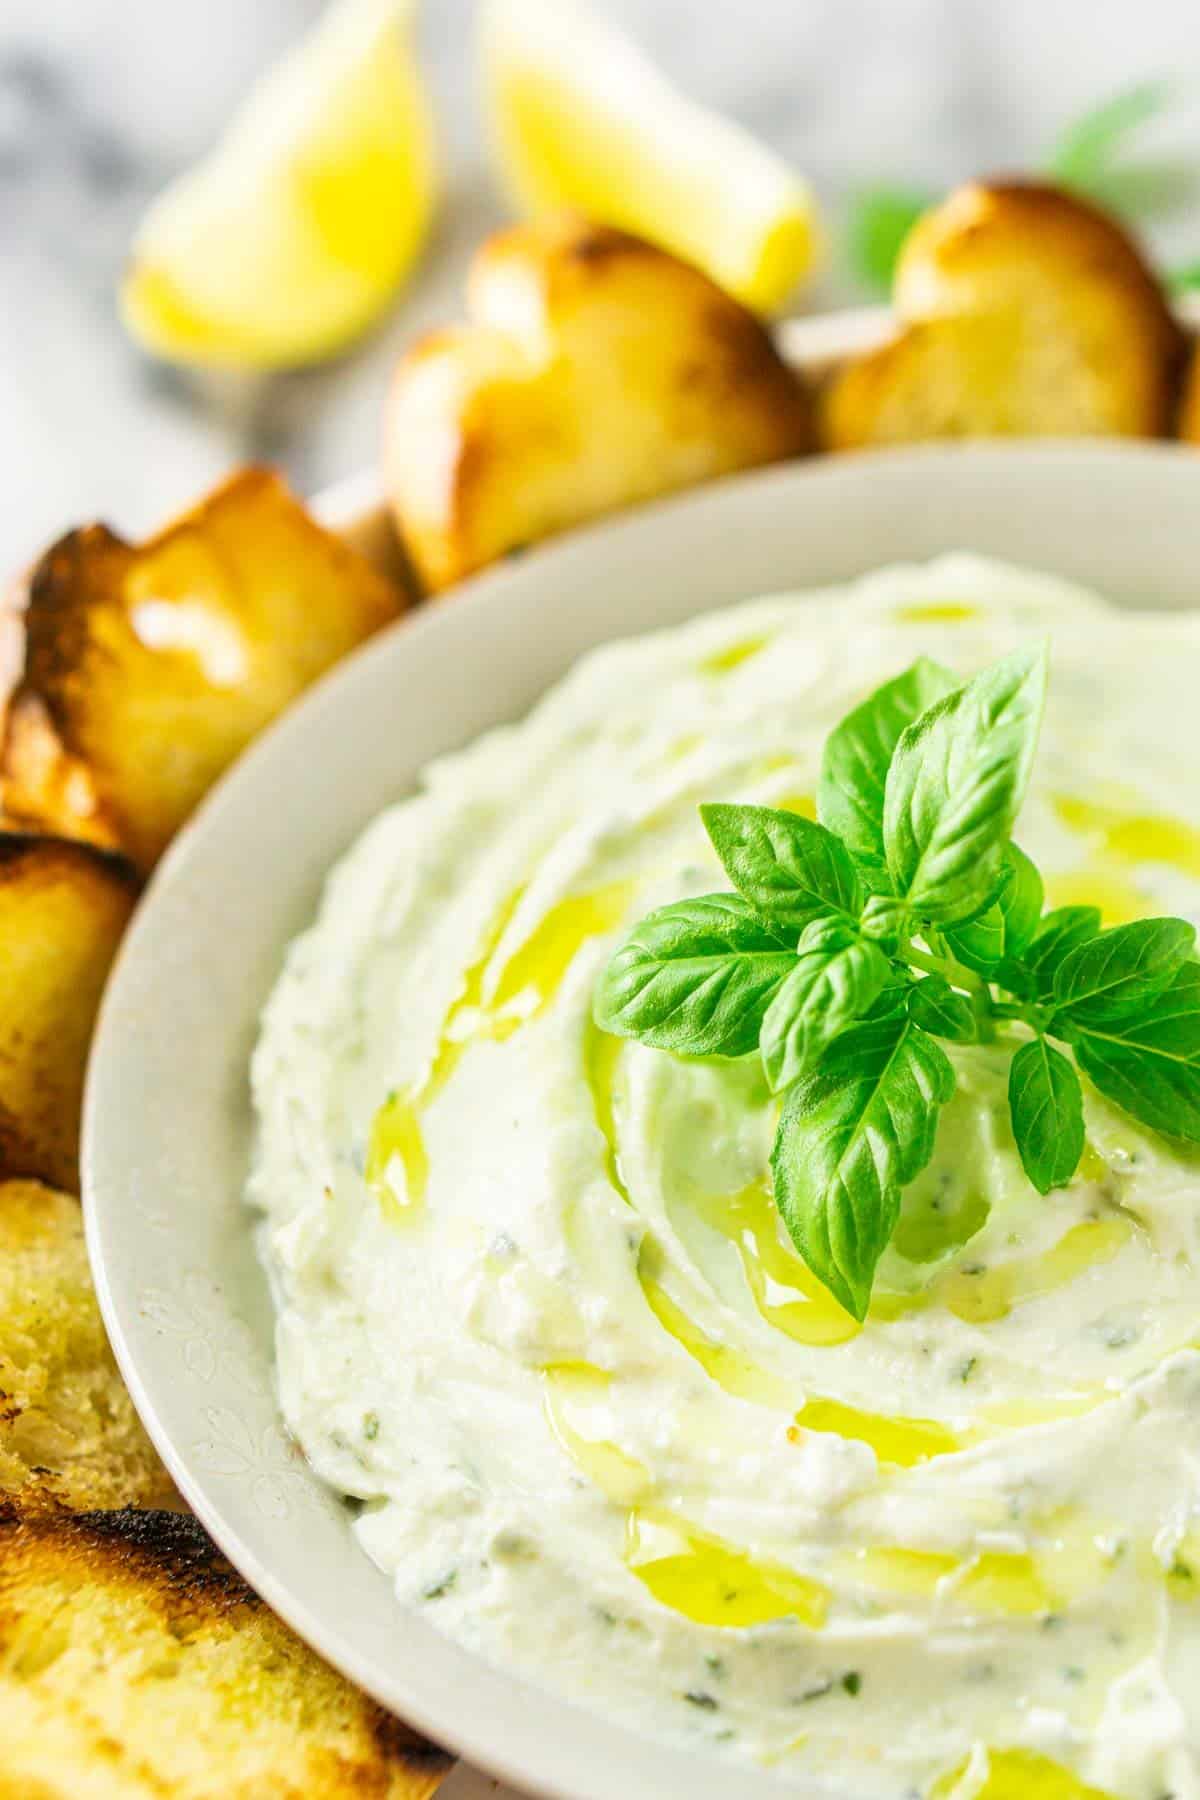 The whipped ricotta dip with toasted bread around it.